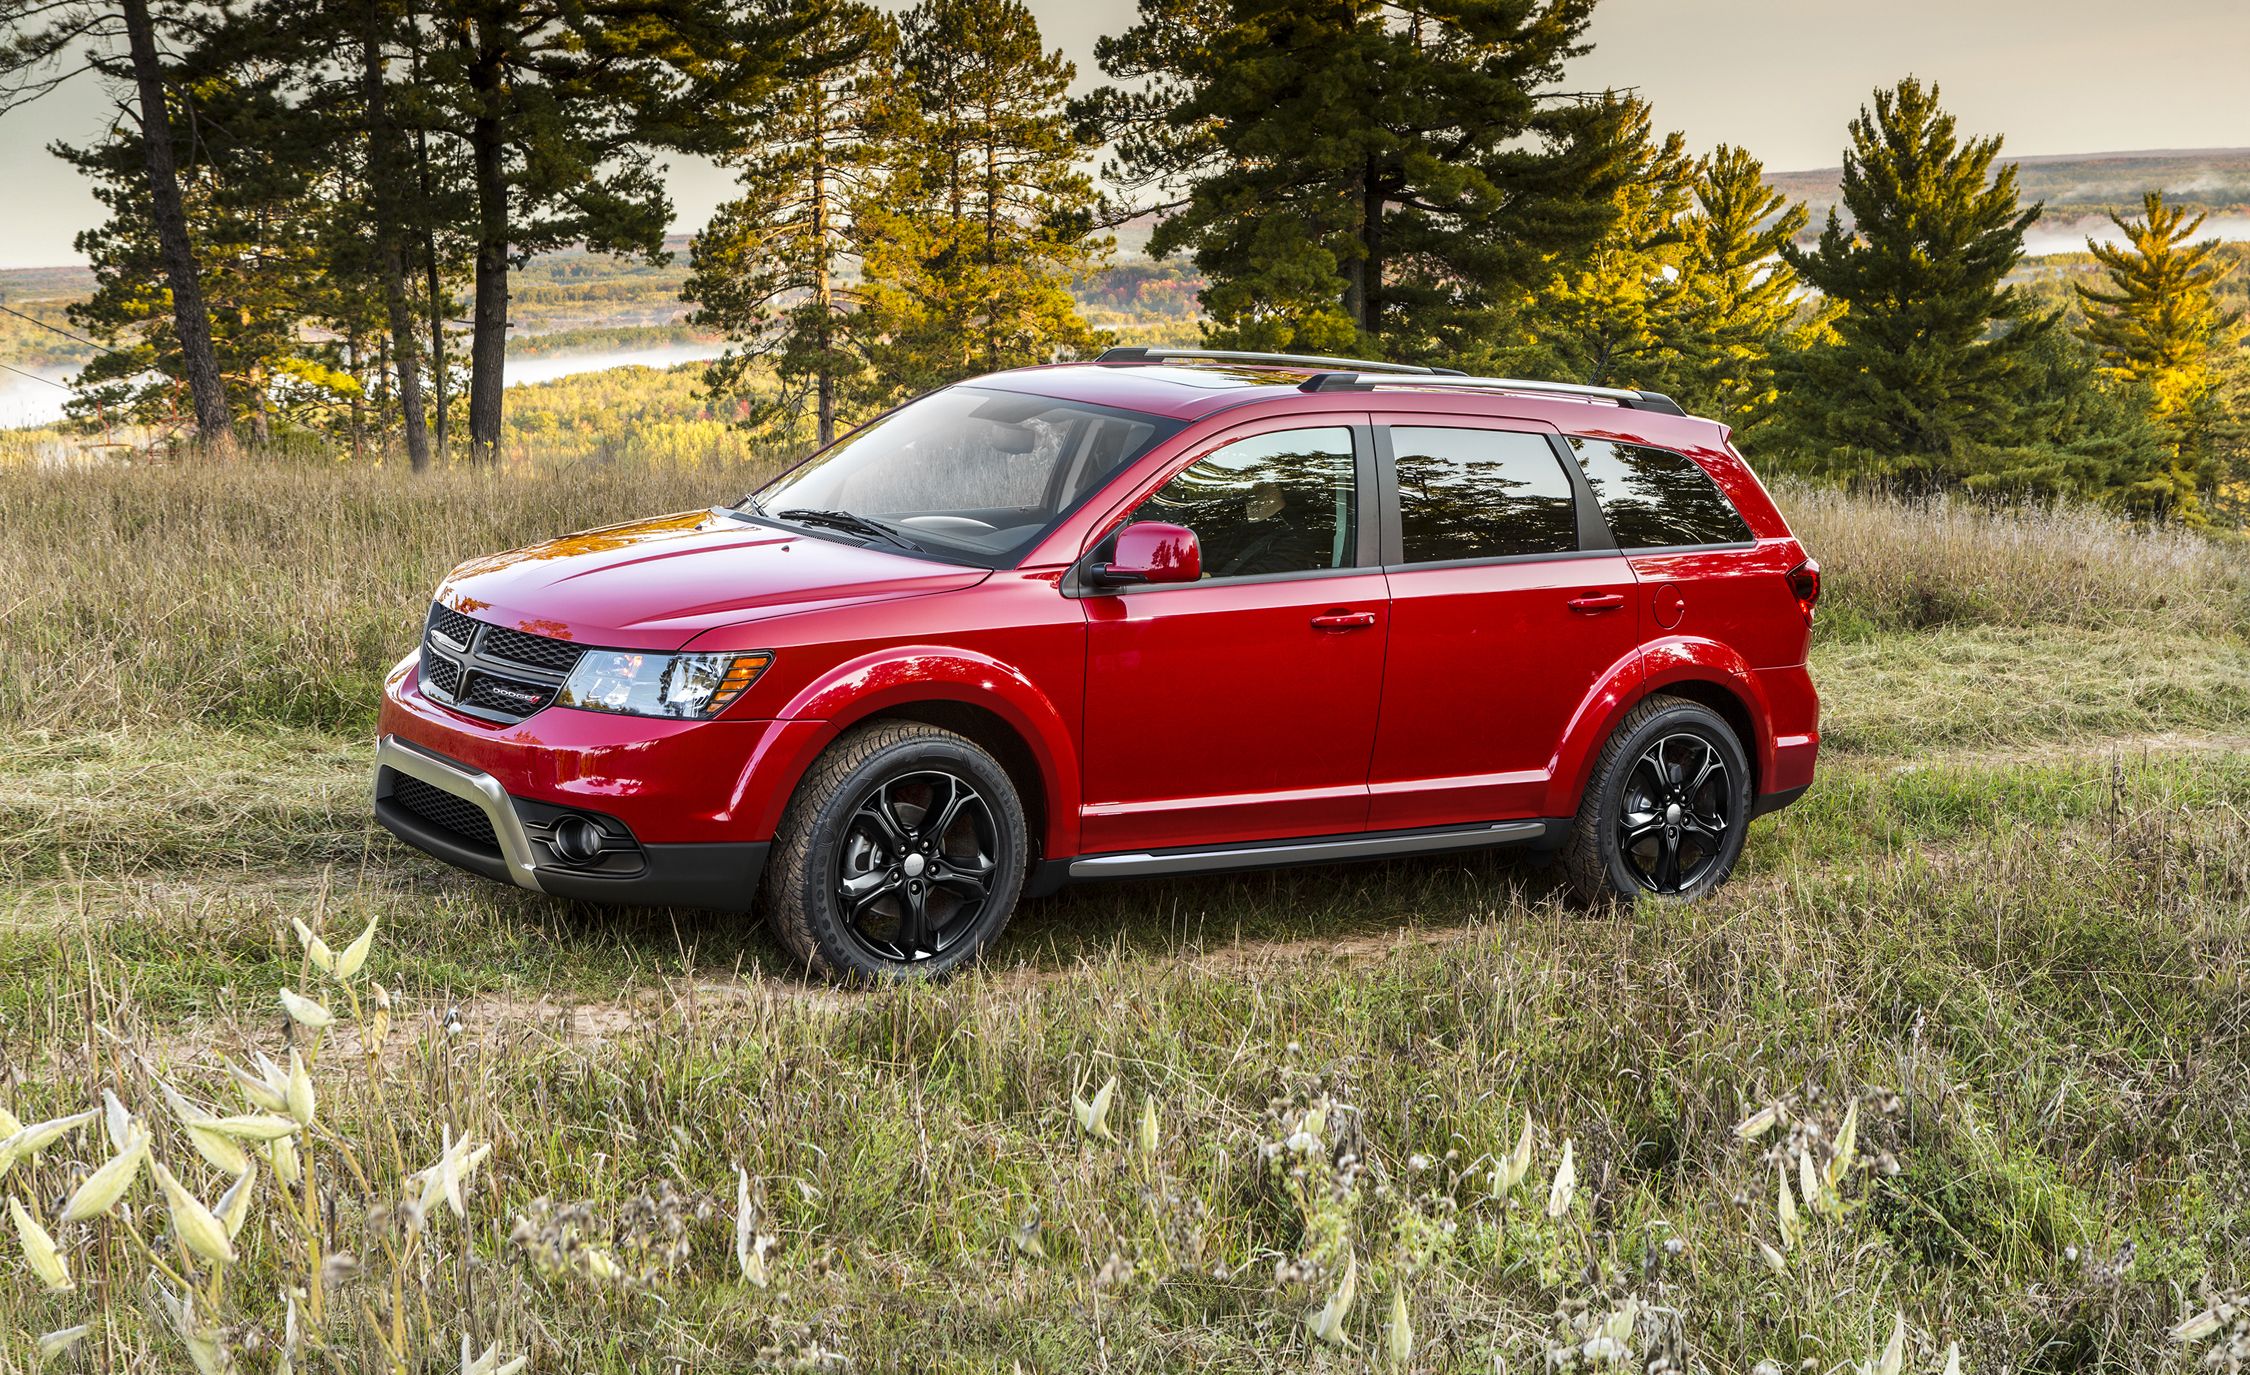 2018 Dodge Journey Review, Pricing, and Specs